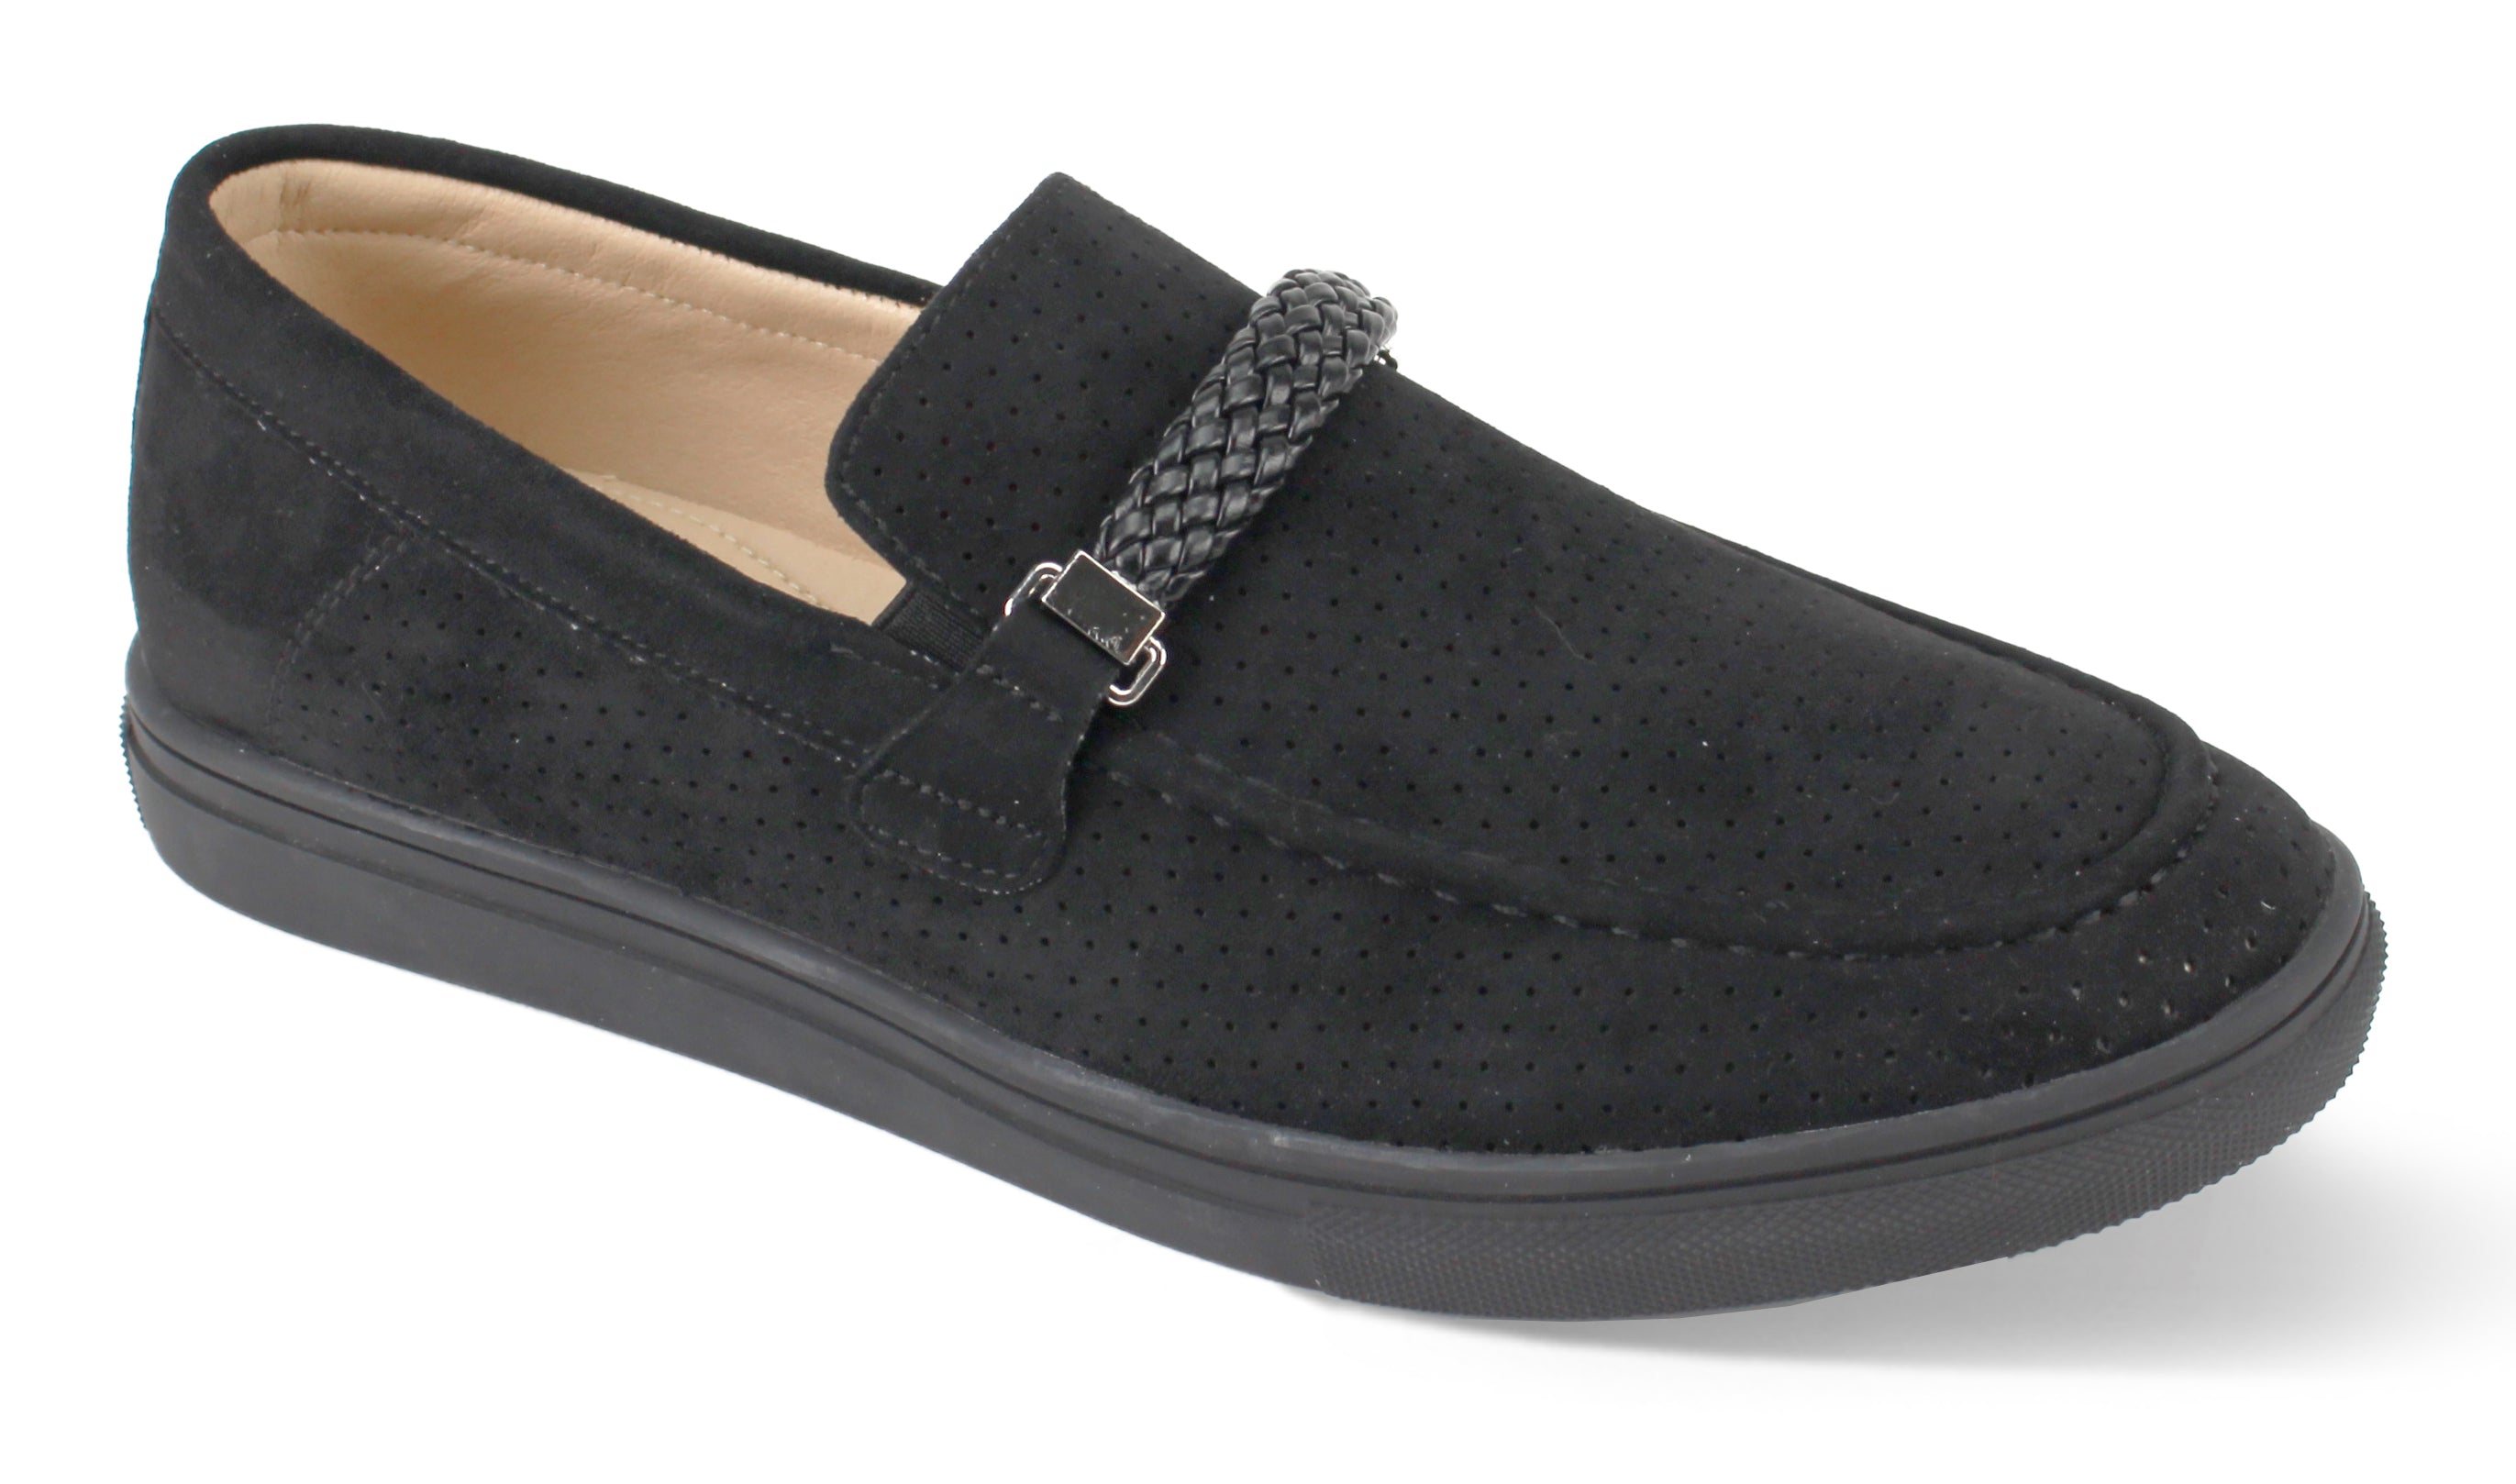 New York City 718 Slip on Casual Shoes